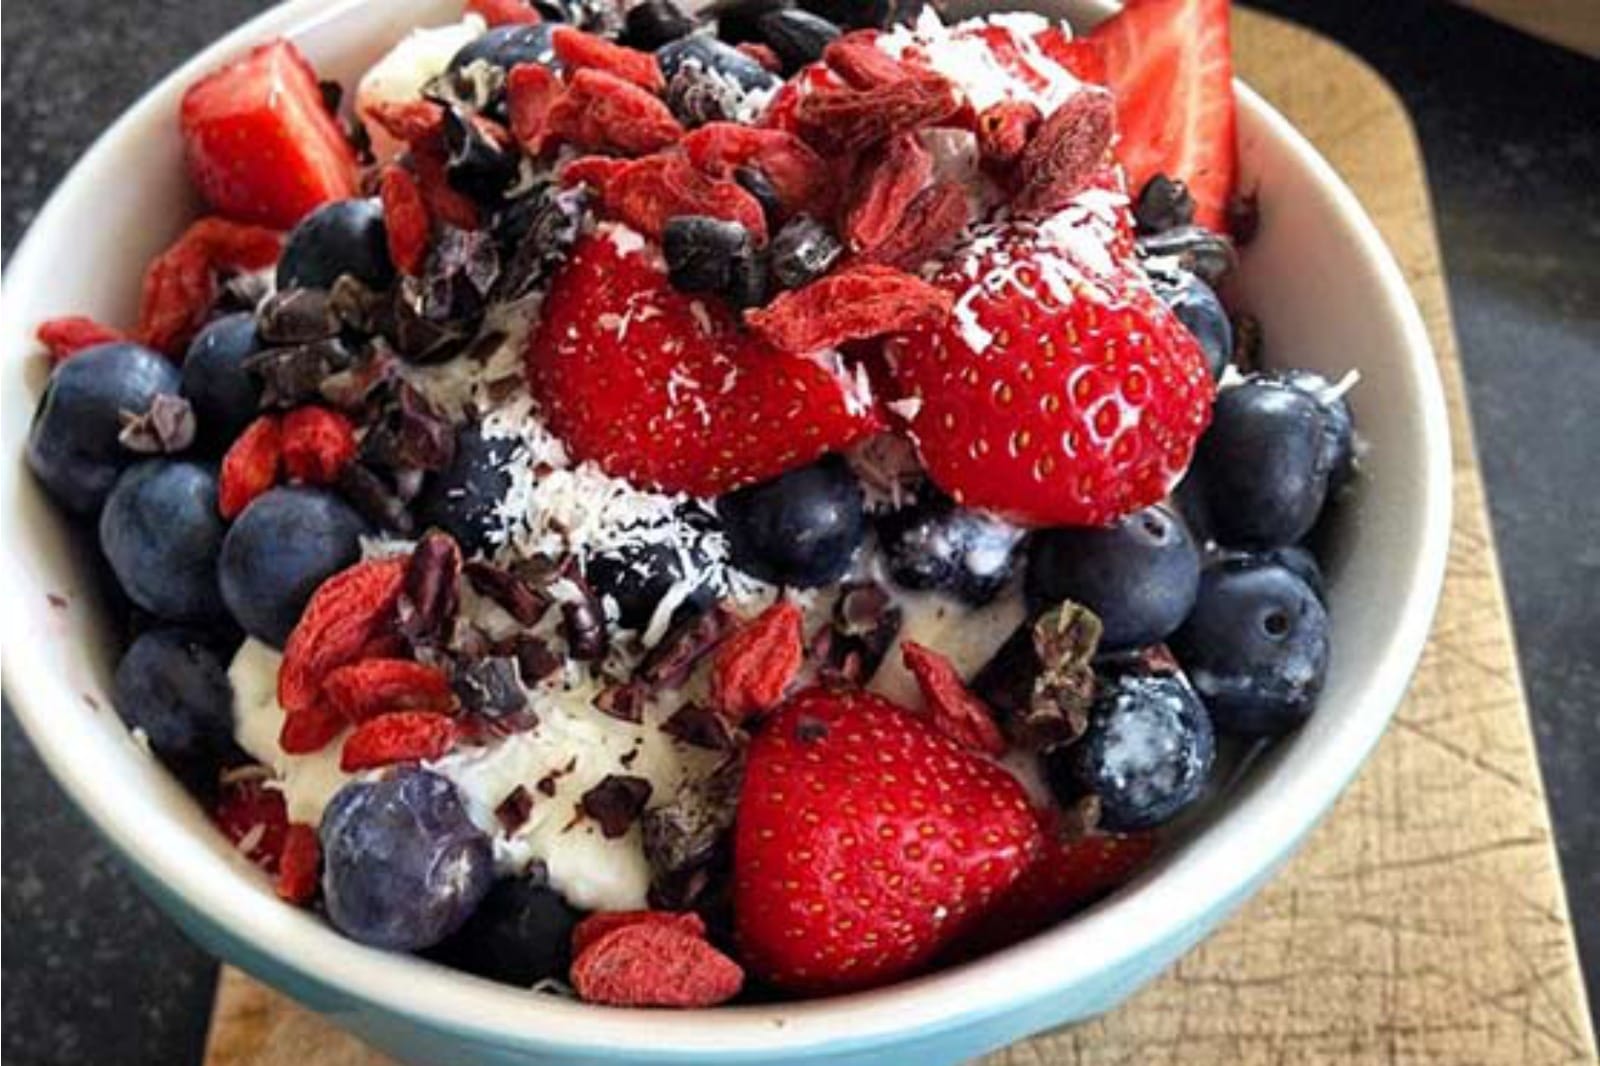 vegan yogurt bowl with fruit. cacao nibs, and coconut